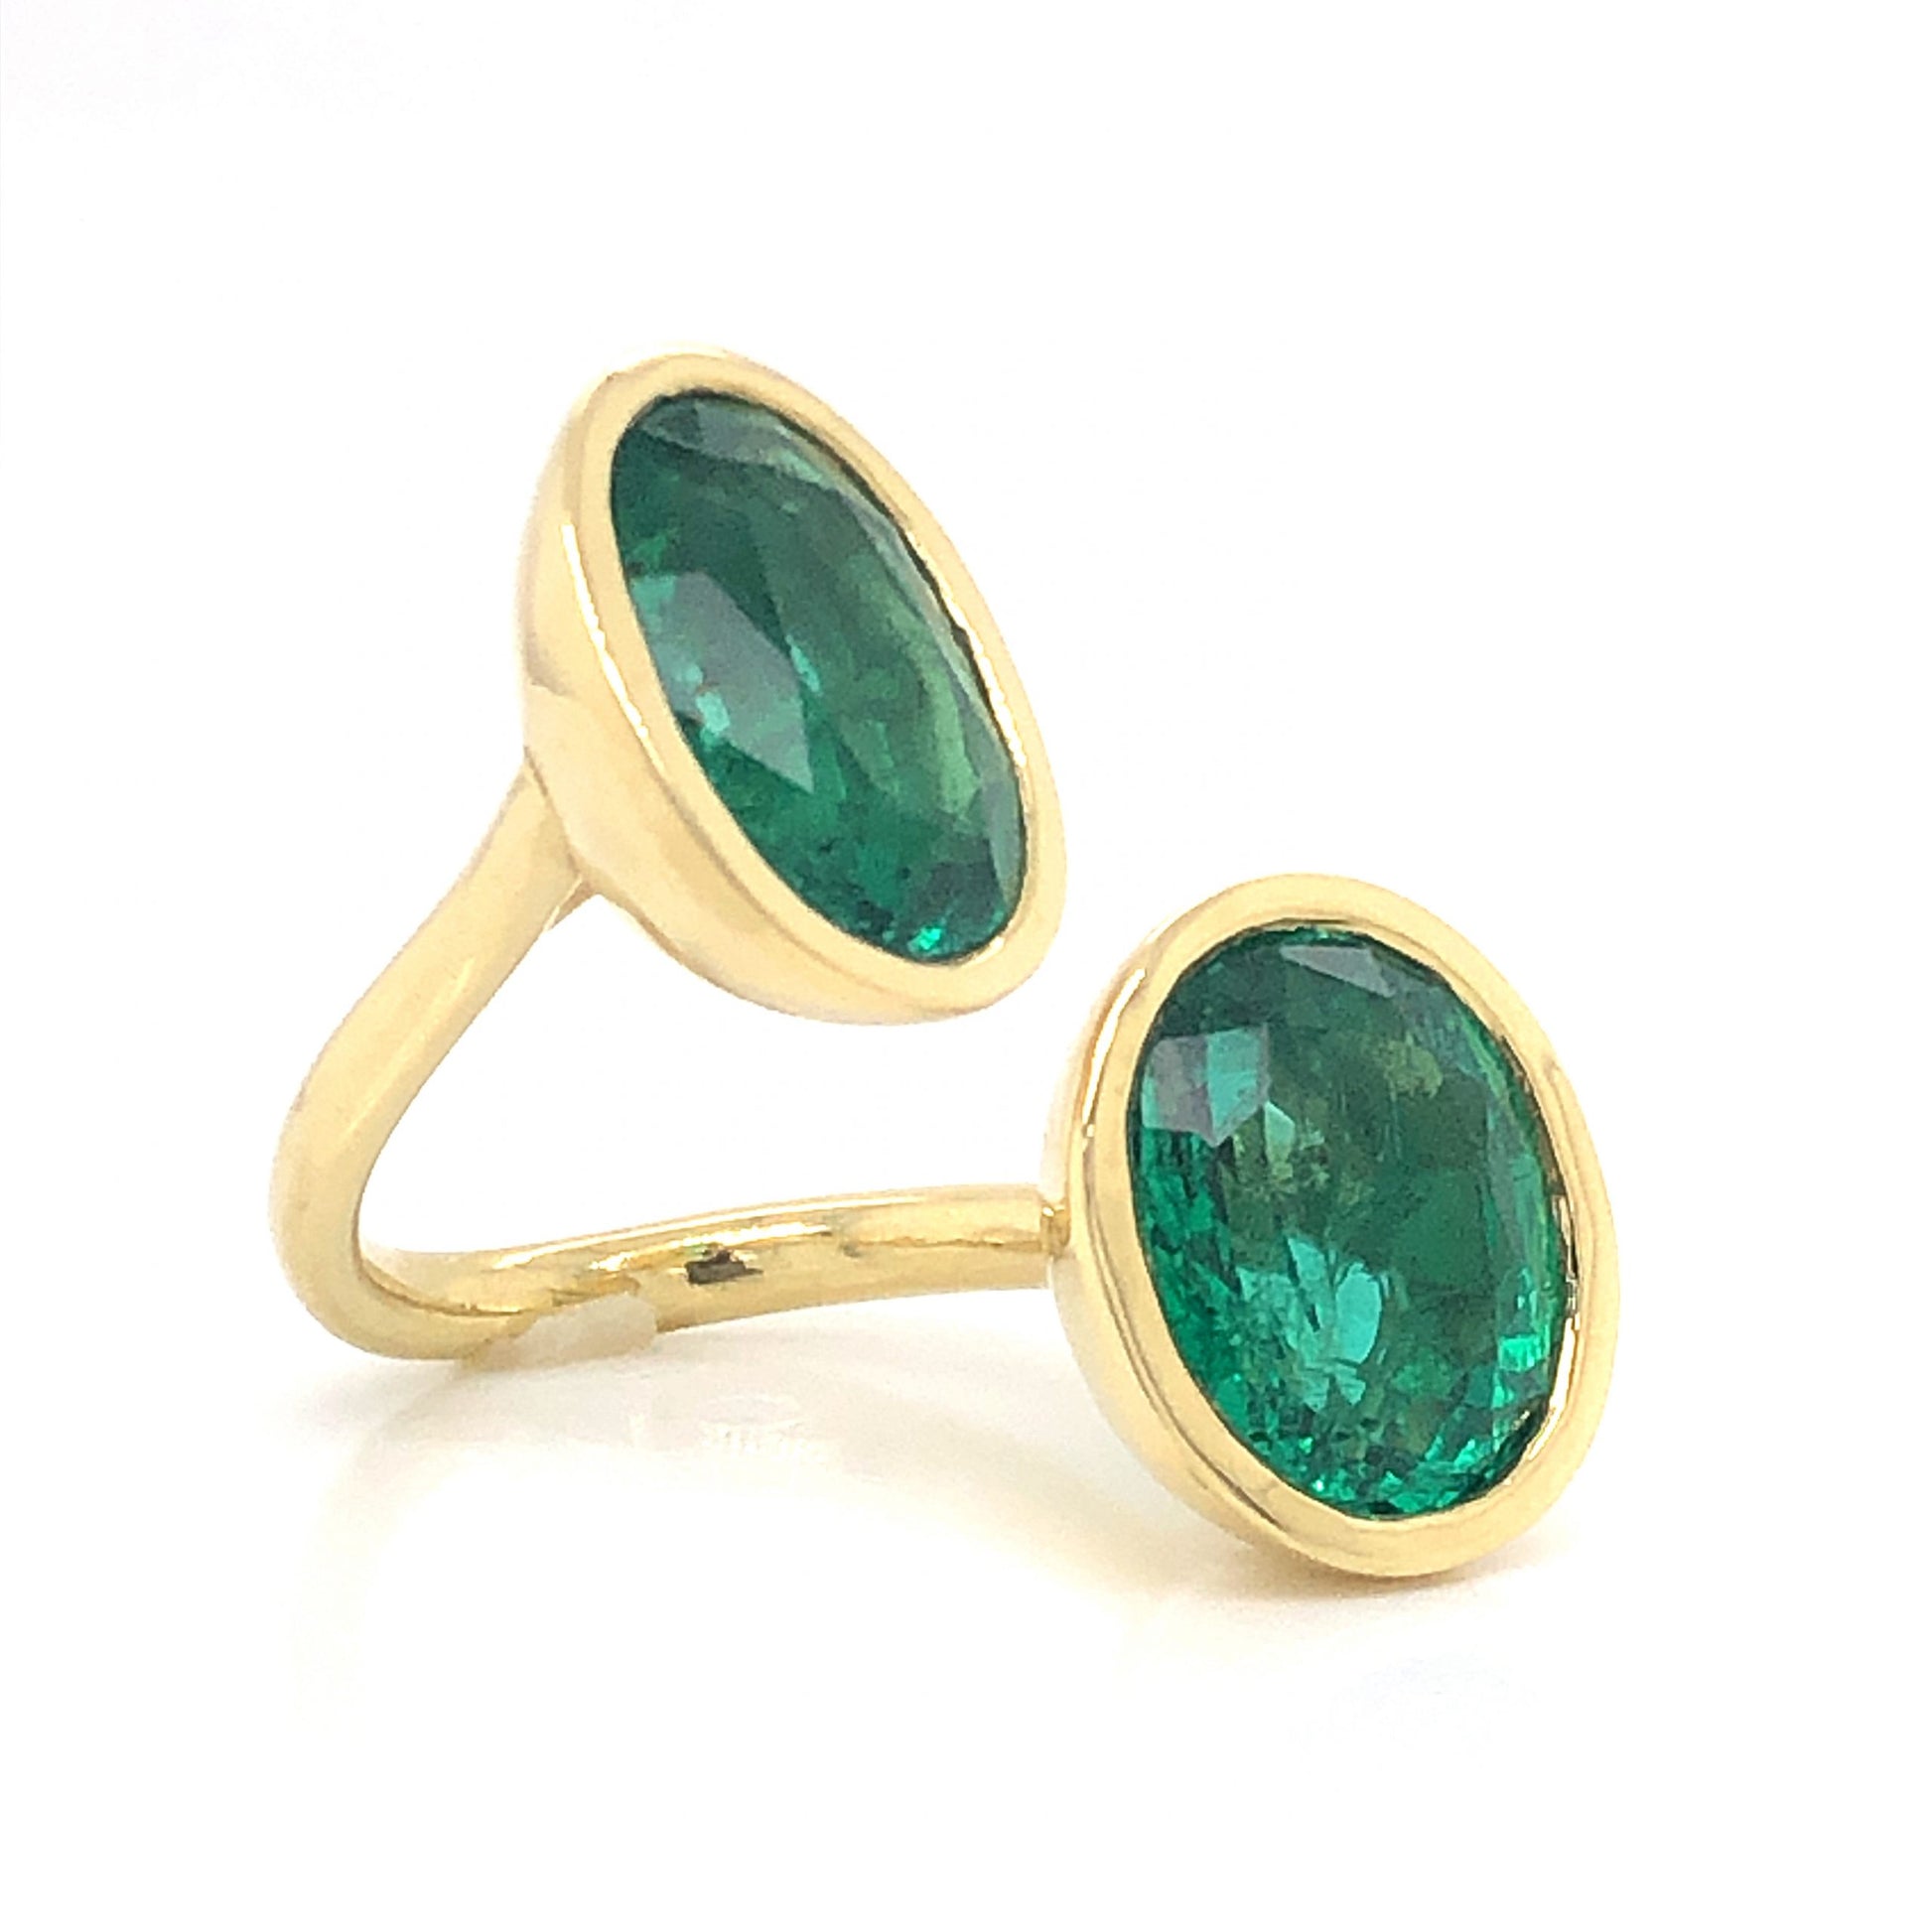 Double Oval Cut Emerald Cocktail Ring in 18k Yellow GoldComposition: 18 Karat Yellow Gold Ring Size: 7 Total Gram Weight: 11.1 g